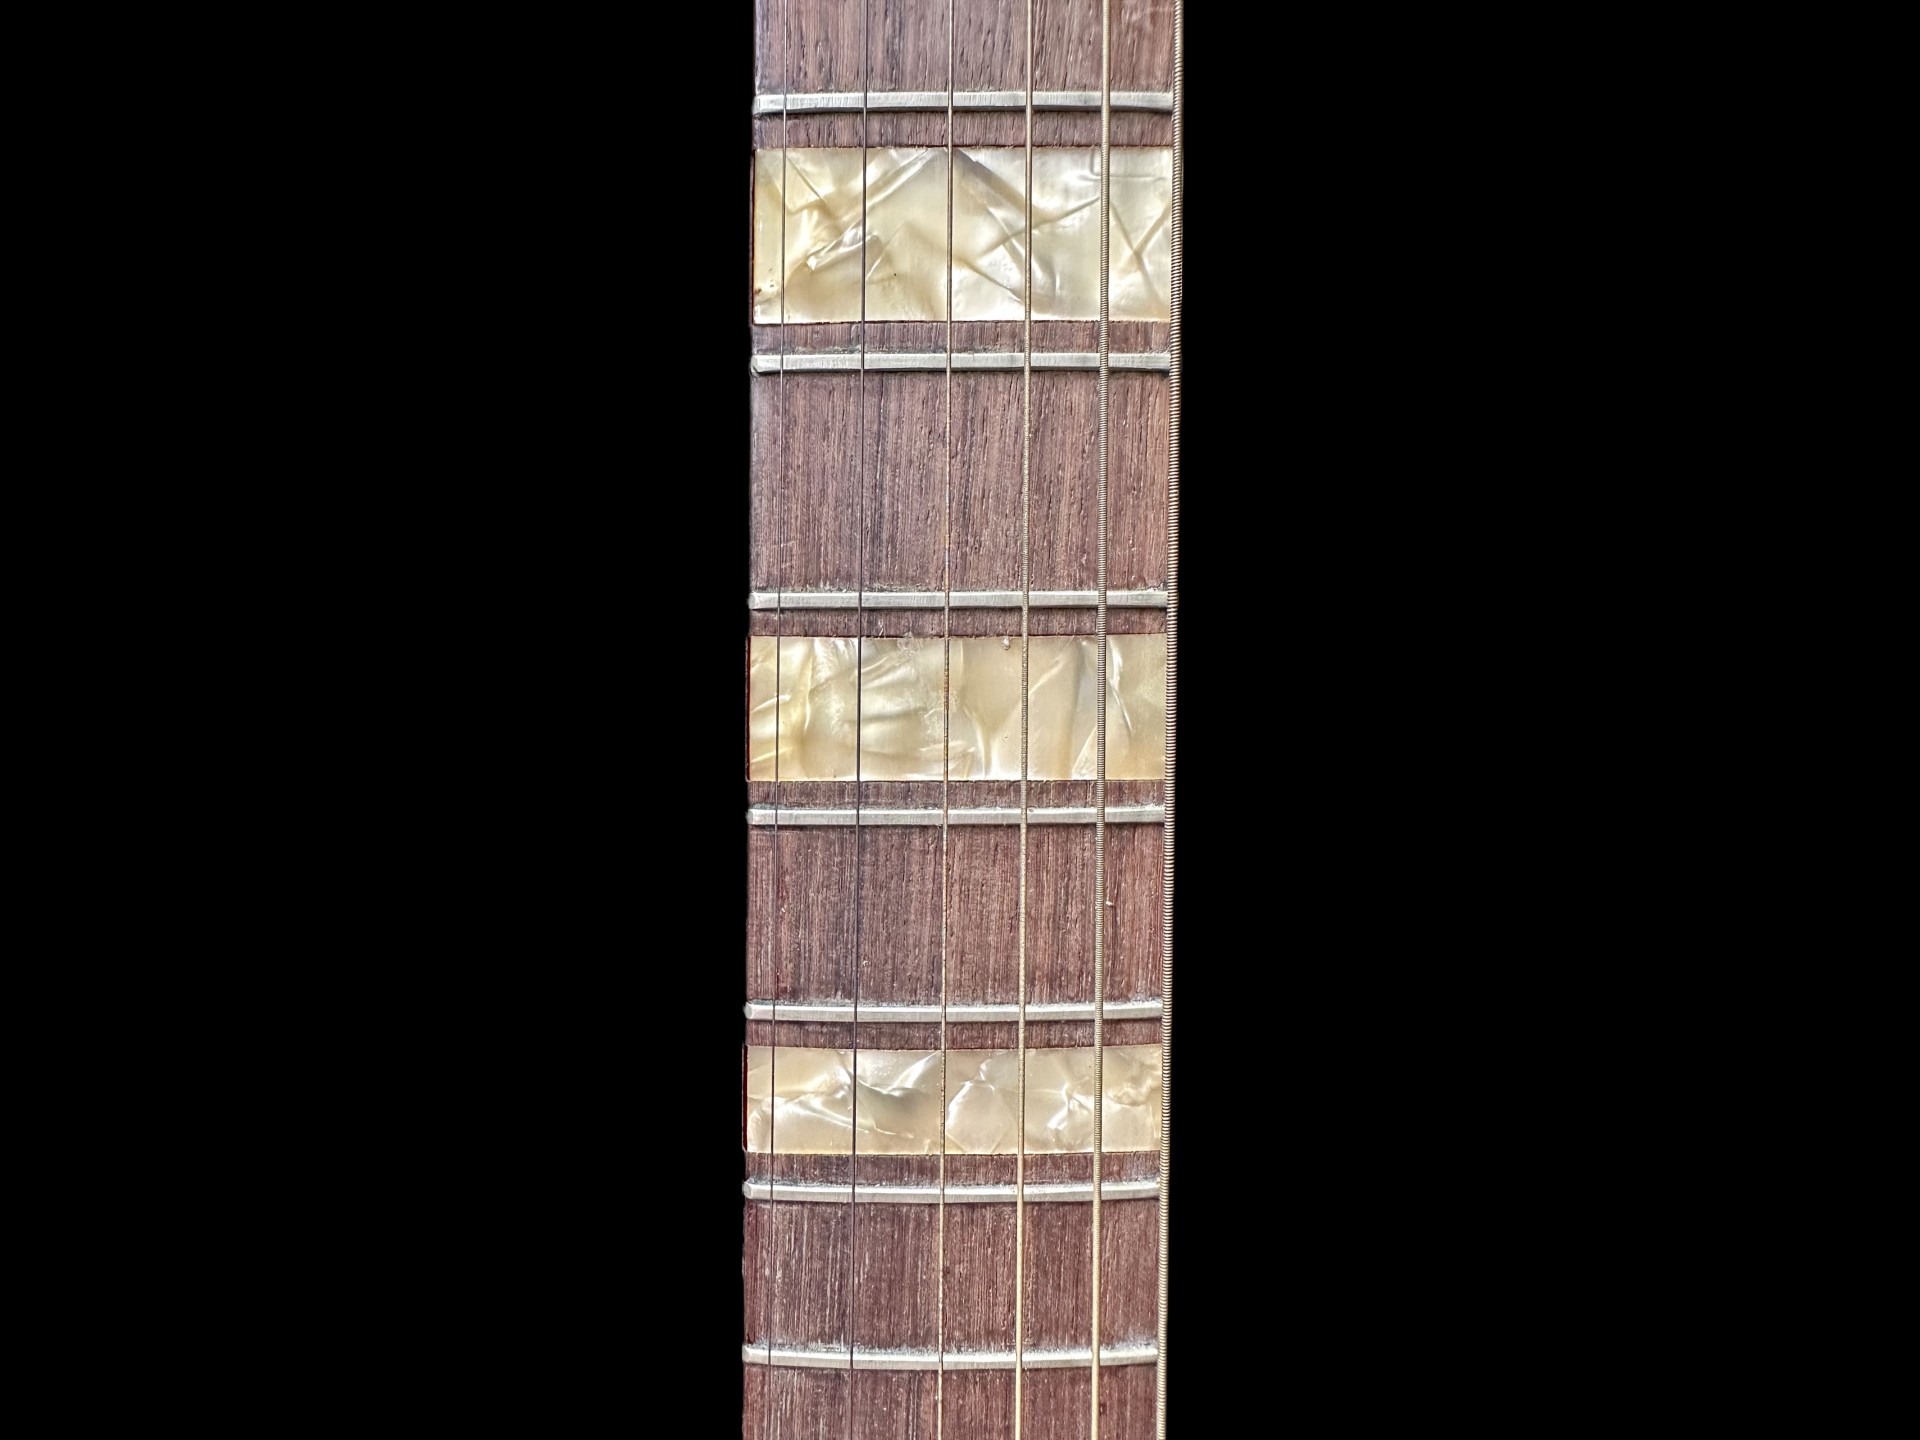 Egmond Freres Spanish Guitar, Six String Guitar with replaced head, length approx. 41''. - Image 3 of 4